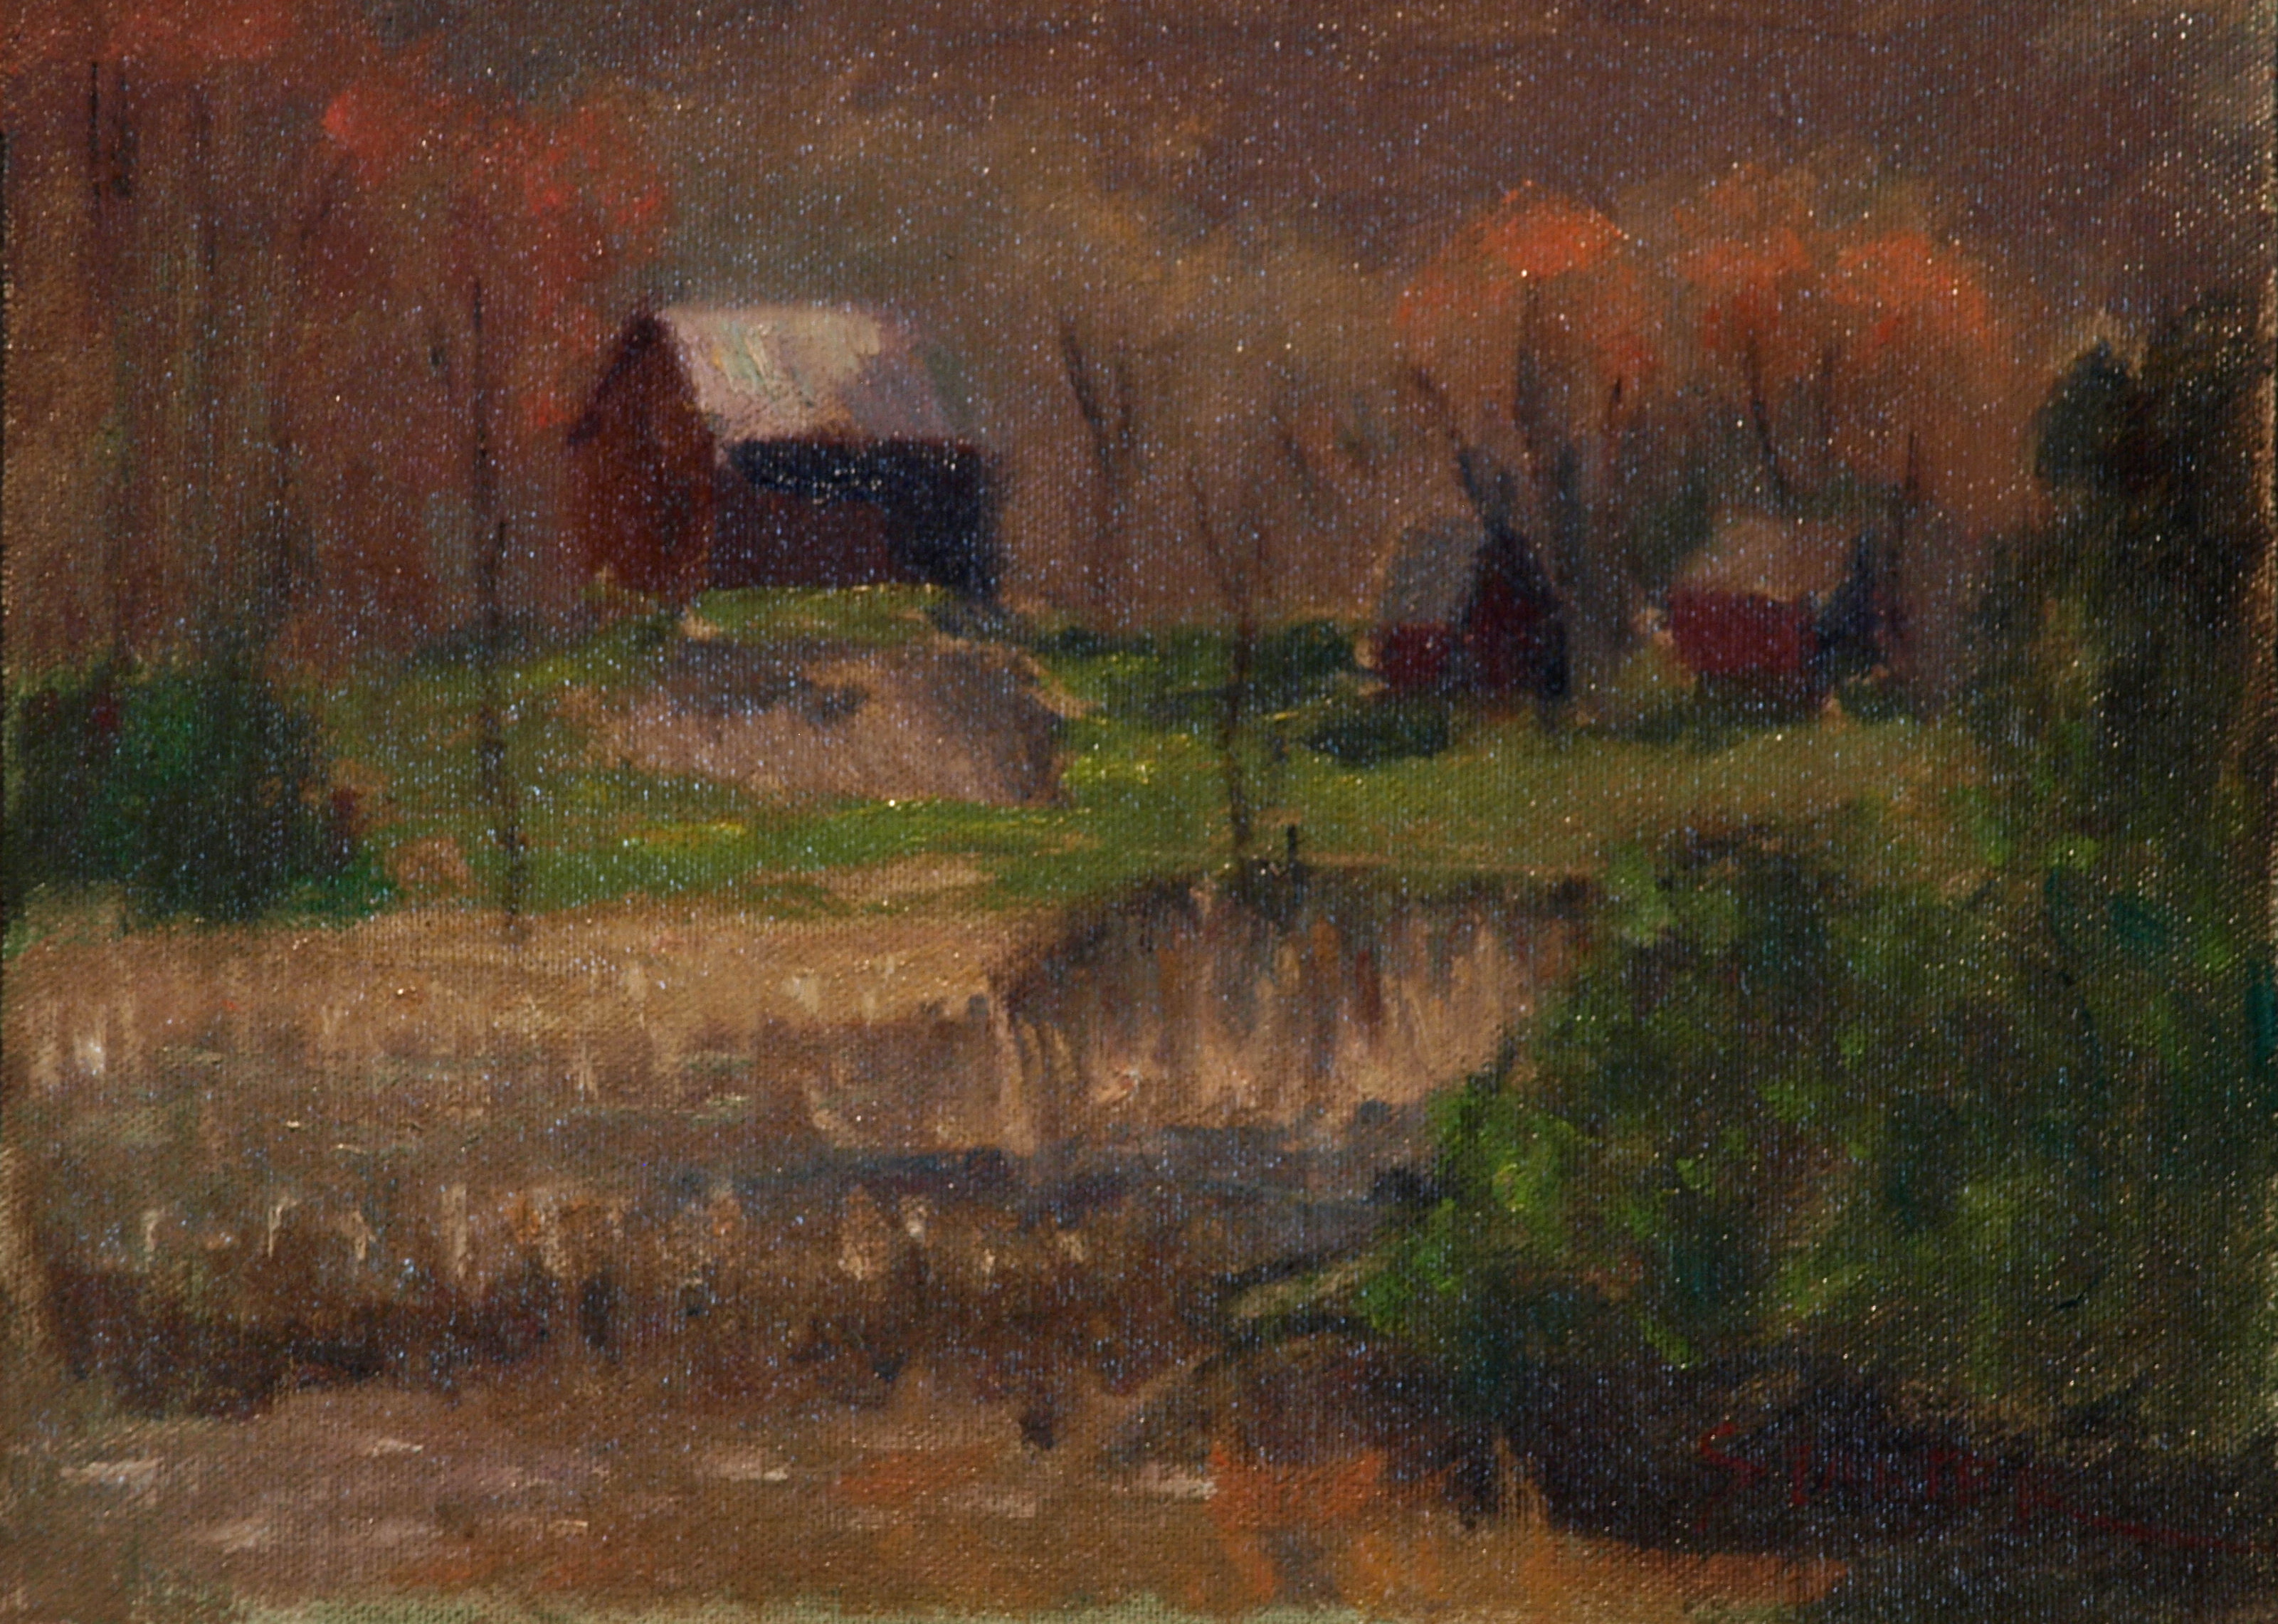 Autumn at Austin's, Oil on Canvas on Panel, 9 x 12 Inches, by Richard Stalter, $225